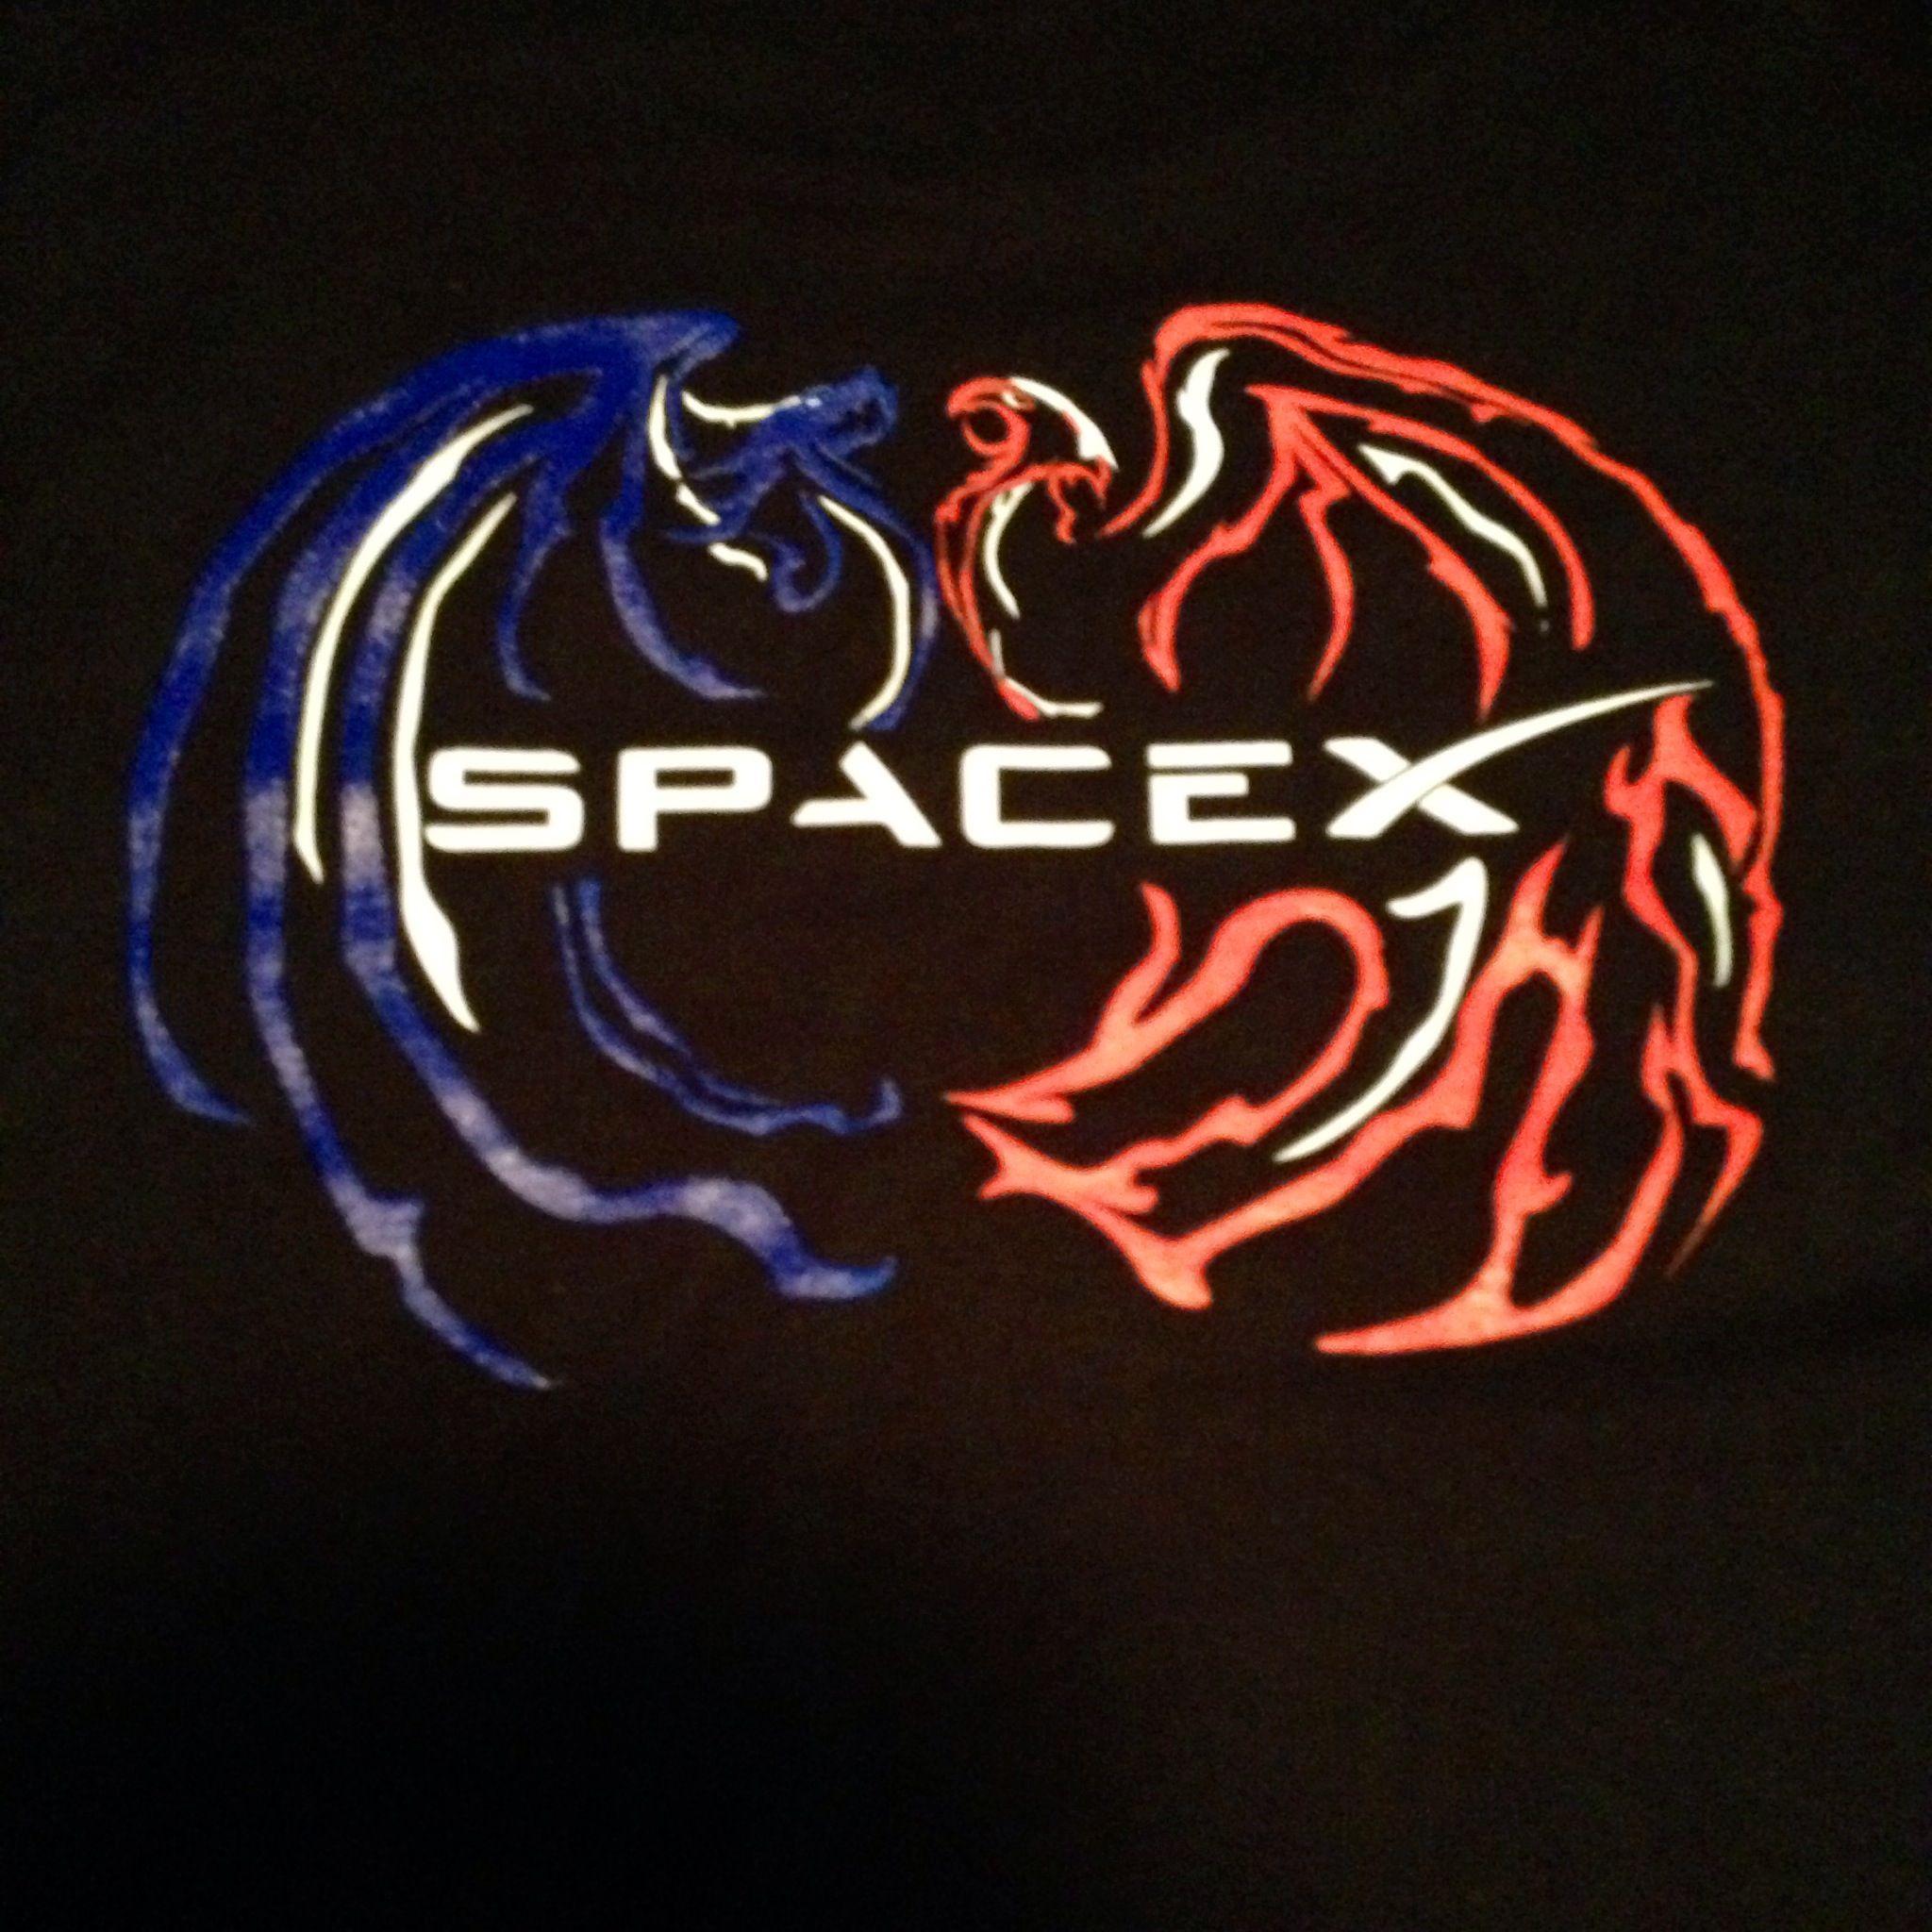 SpaceX Dragon Logo - Went on a tour of the SpaceX factory today. It was cooler than I'd